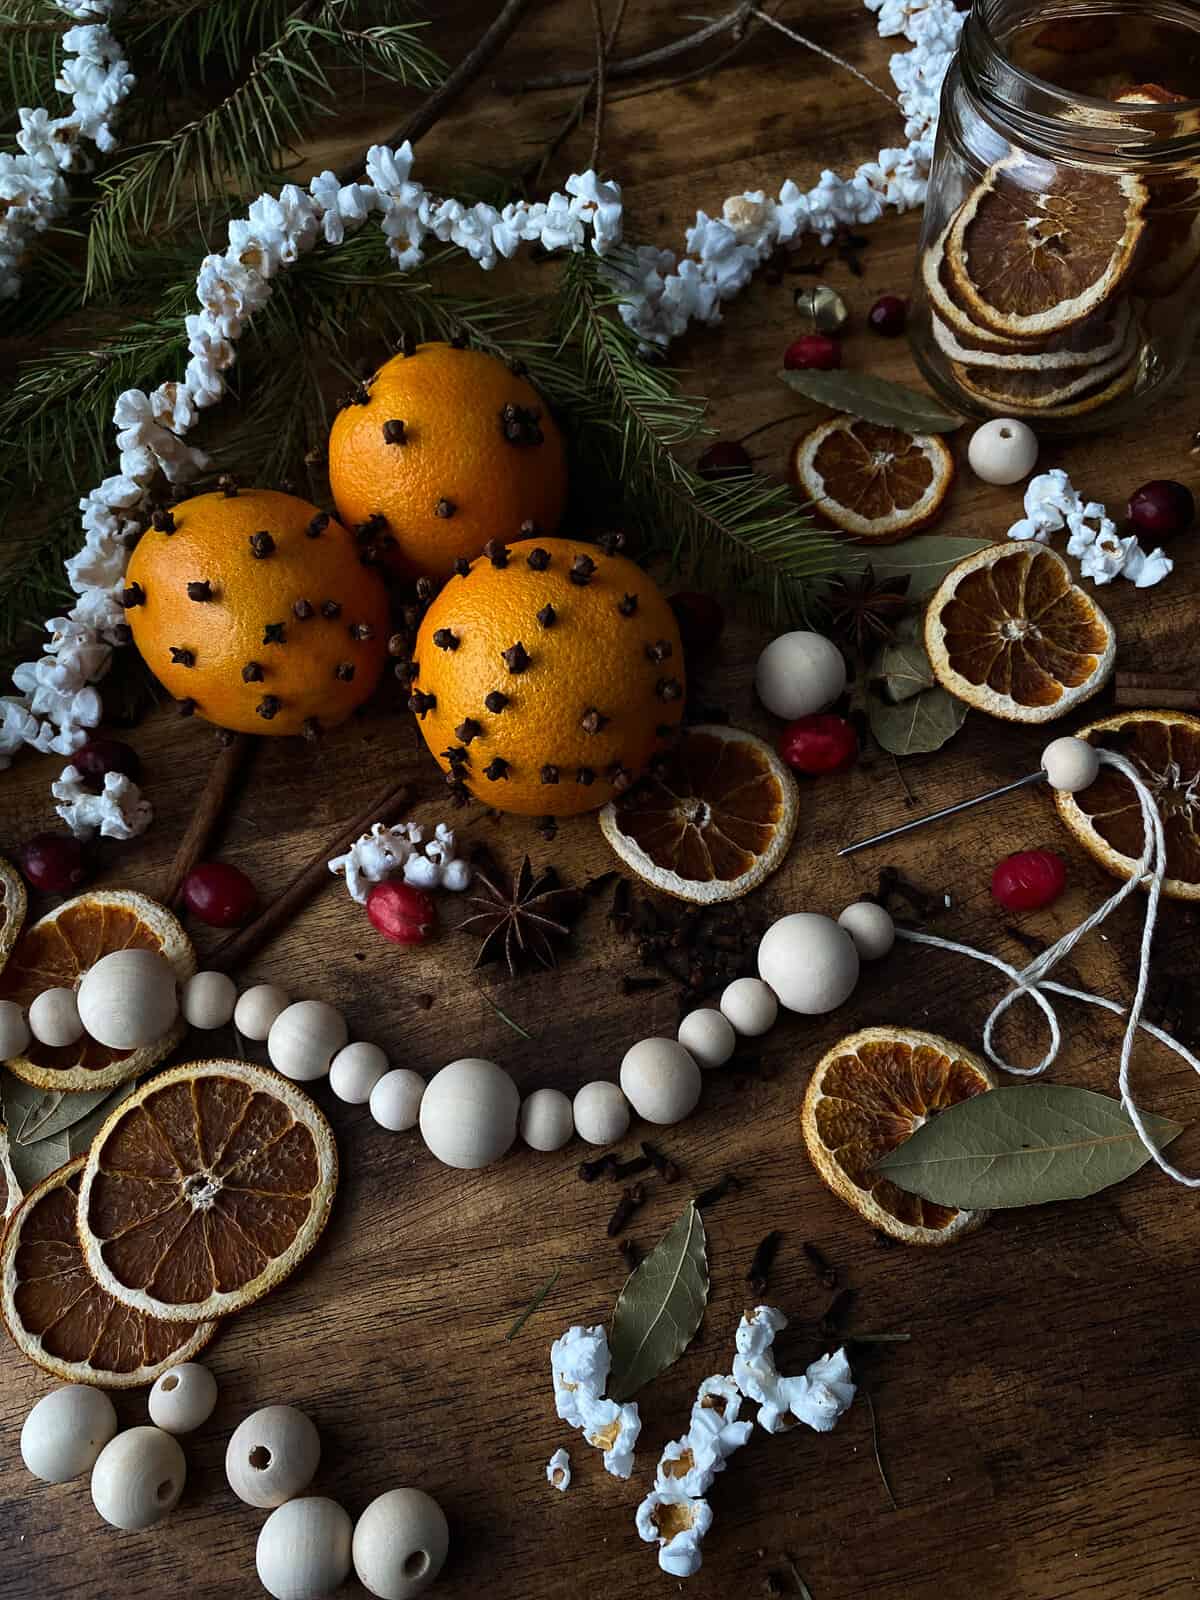 orange pomanders, wooden bead garland, popcorn garland, and so many crafting supplies all over a wooden work surface